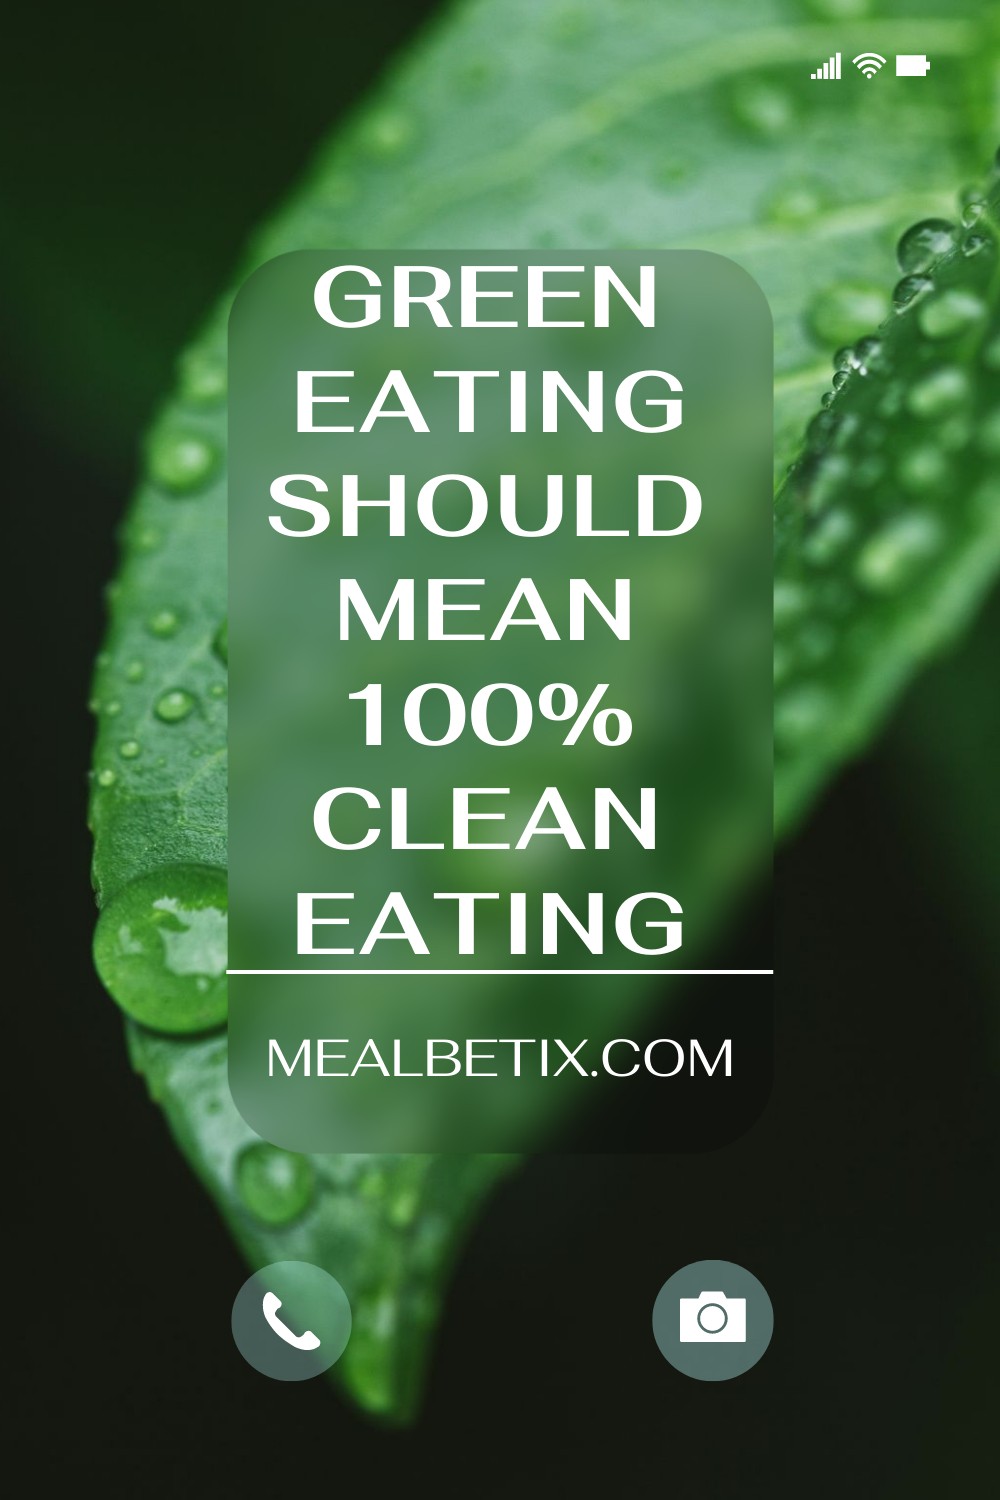 GREEN EATING SHOULD MEAN 100% CLEAN EATING